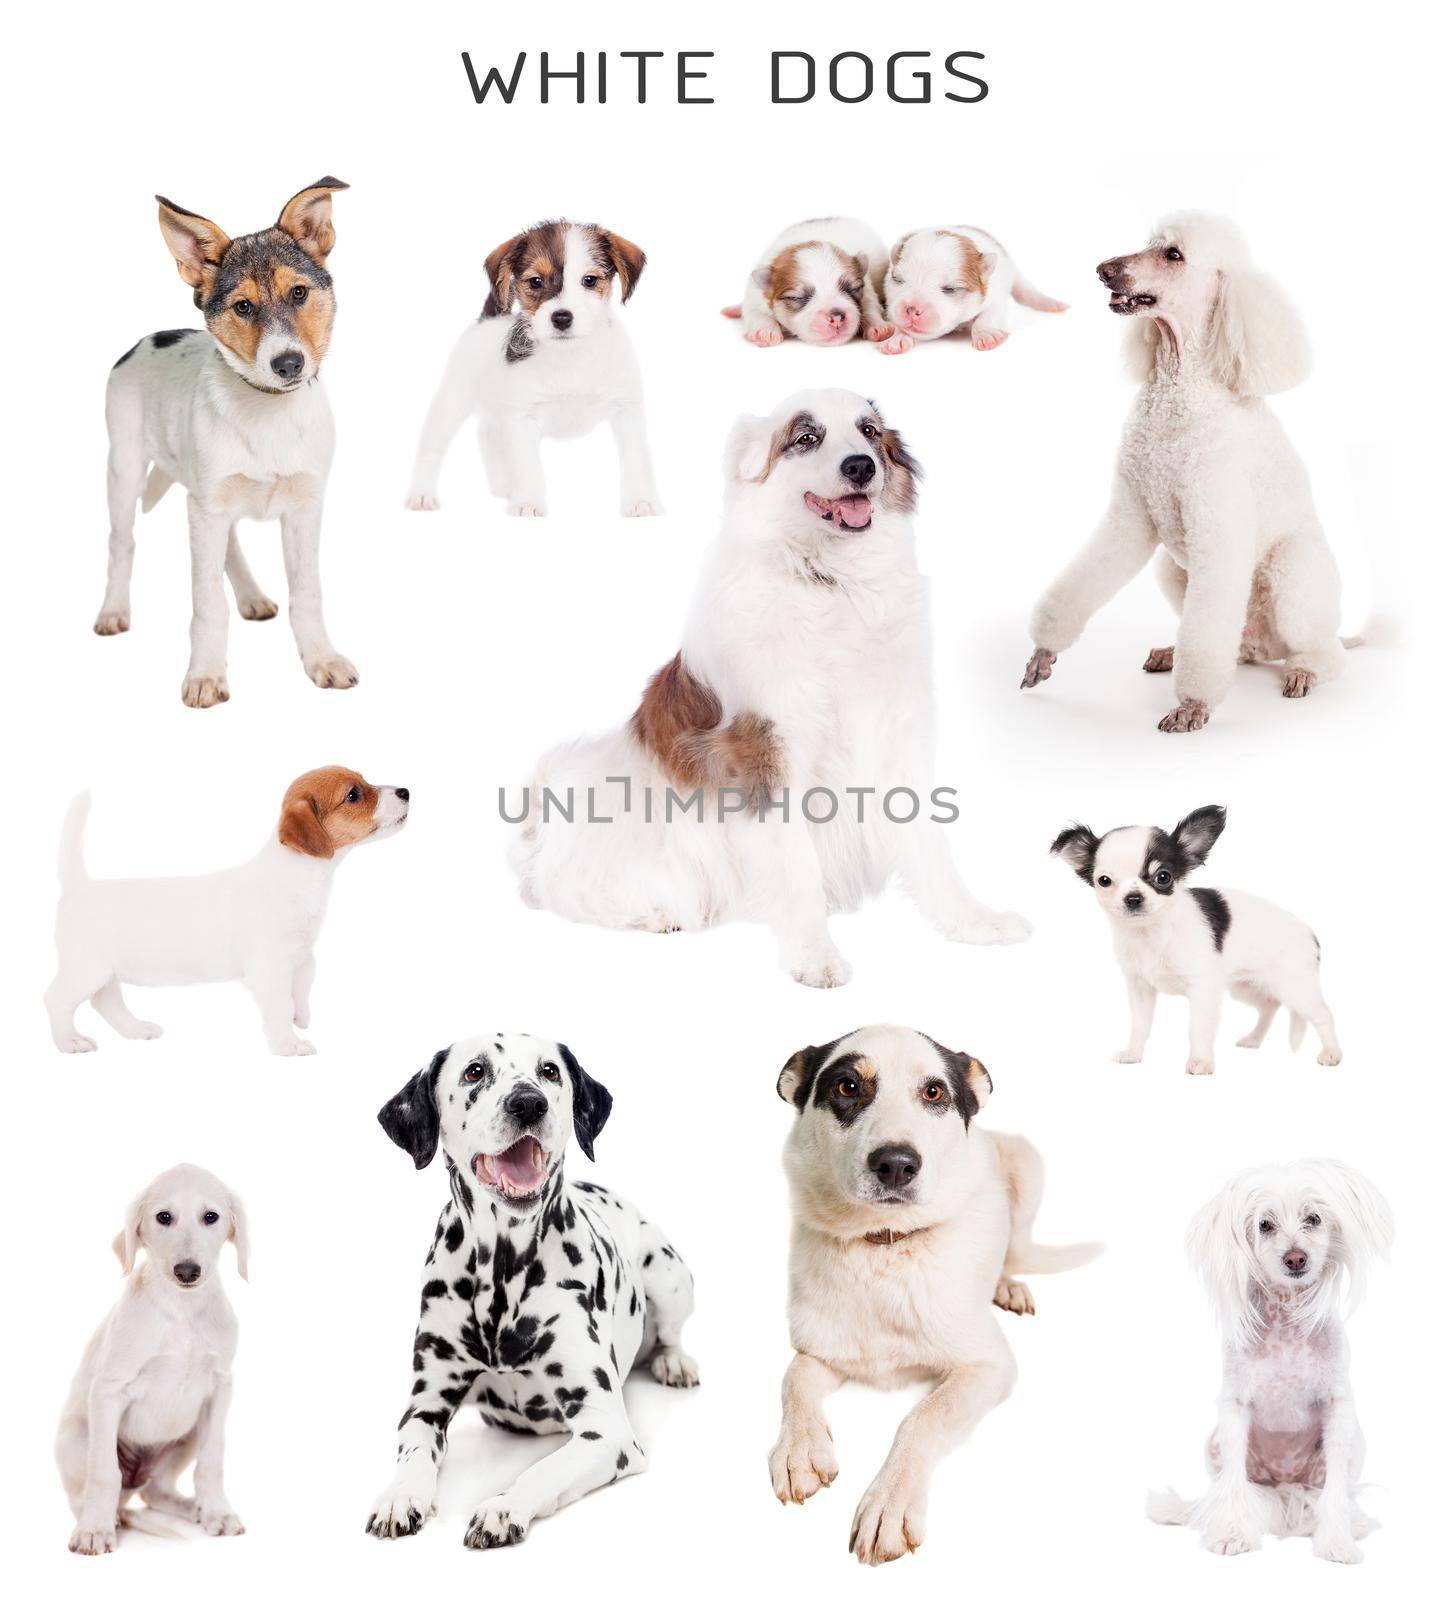 White dogs set by RosaJay